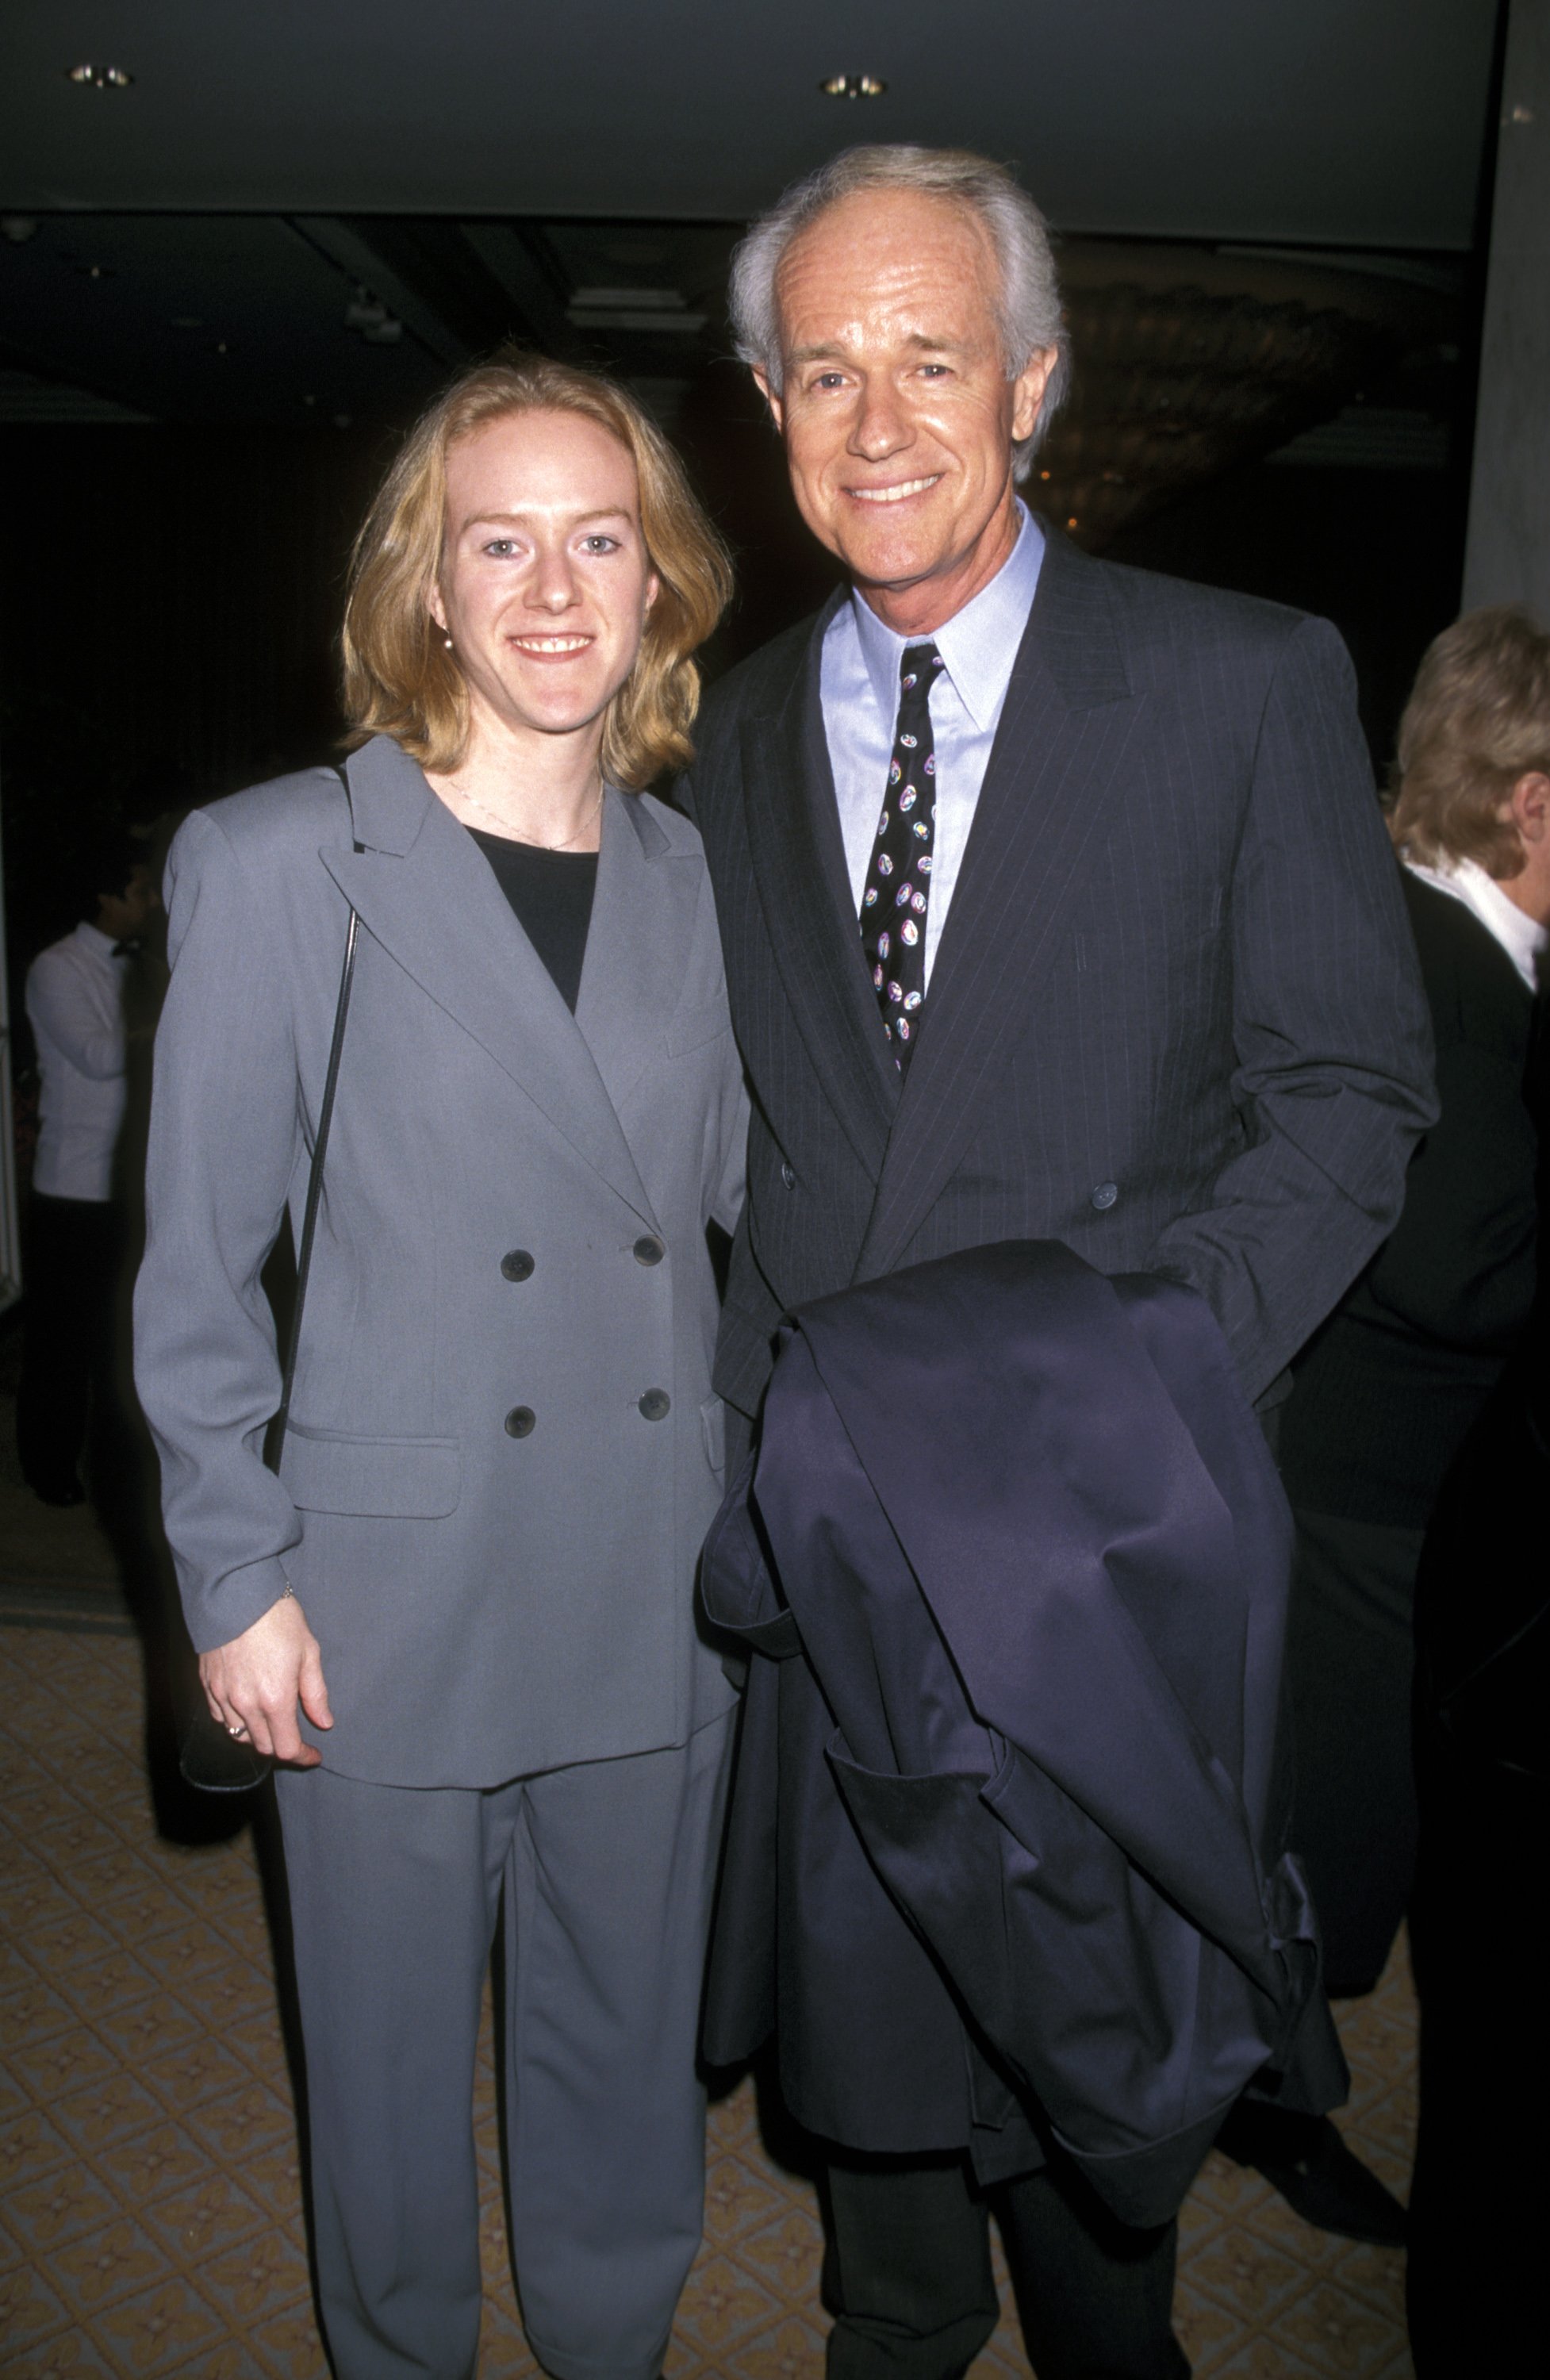 Mike Farrell and Erin Farrell attend the 'Tourette Syndrome Association Honors R. Dreyfuss and O. Sacks' at the Beverly Wilshire Hotel on February 5, 1998 in Beverly Hills, California ┃Source: Getty Images